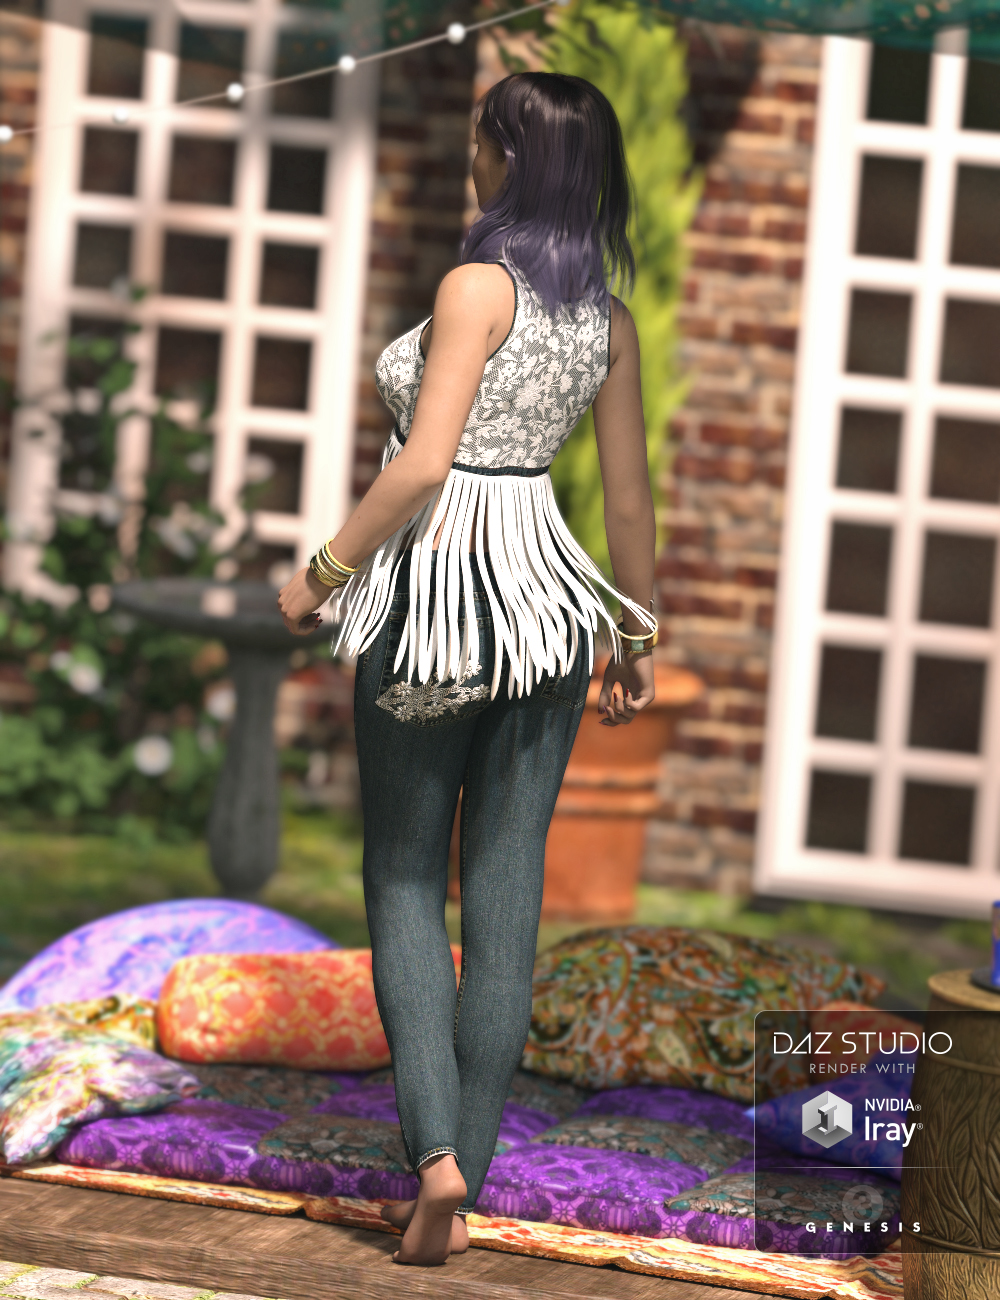 Fringed by: Sarsa, 3D Models by Daz 3D